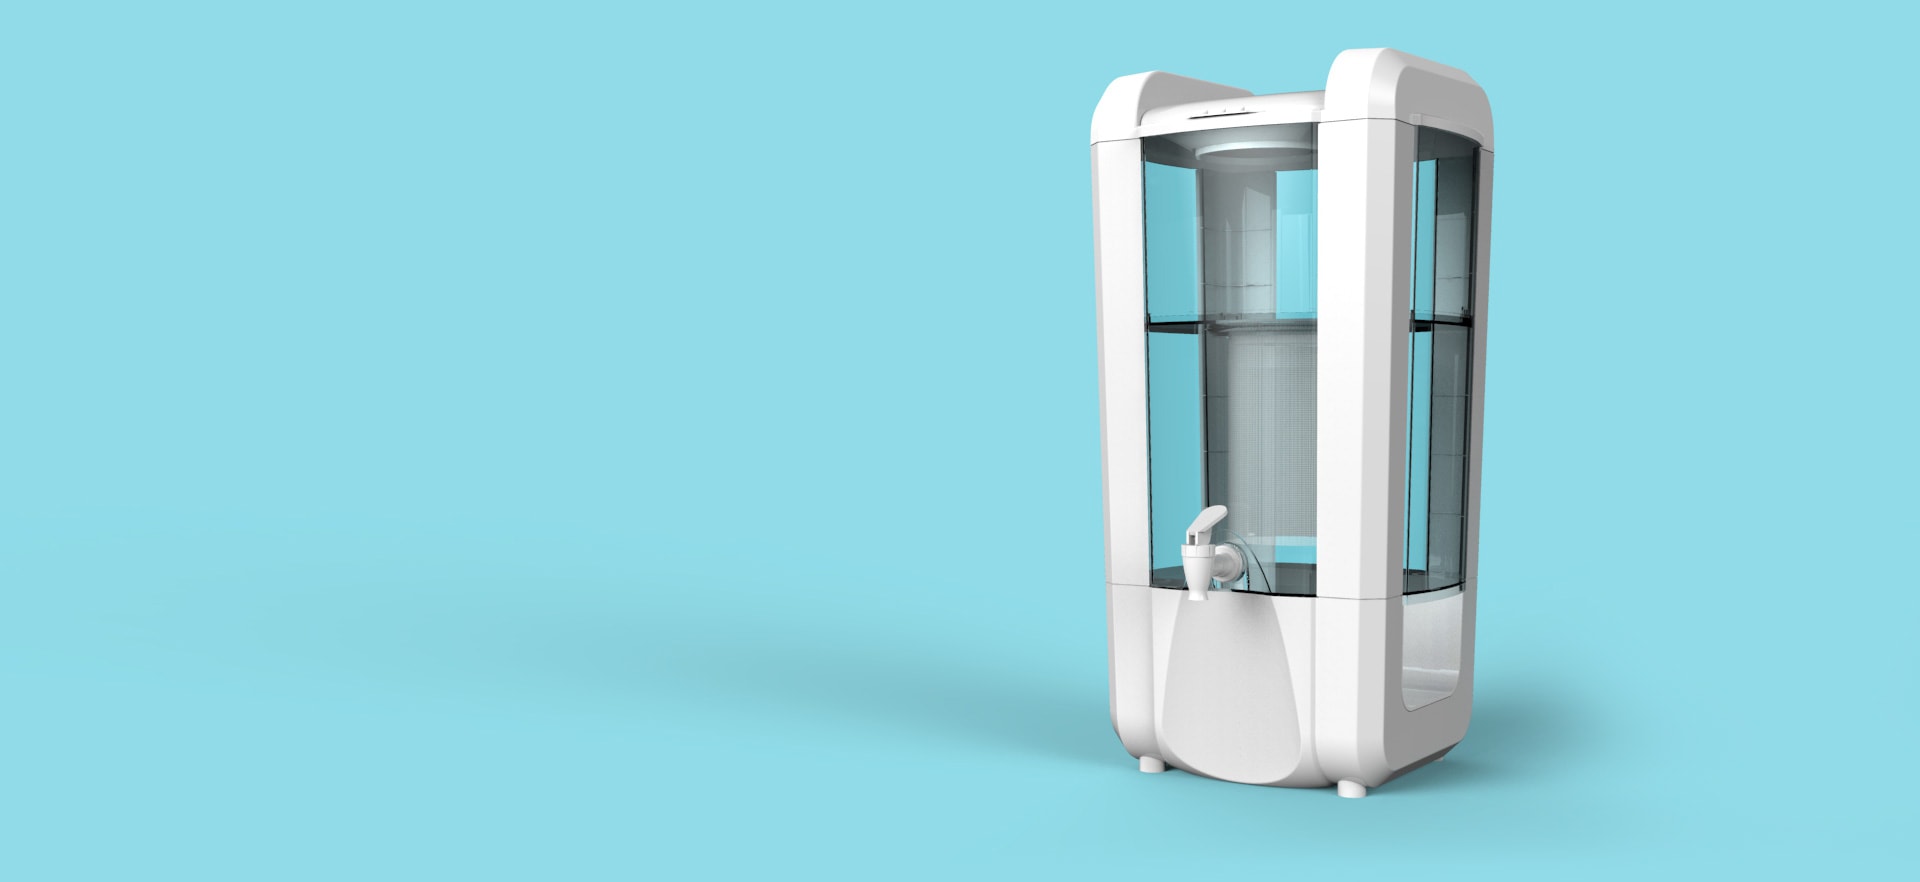 Bluebird water purifier designed by Story Design to clean polluted water for fresh drinking water supply